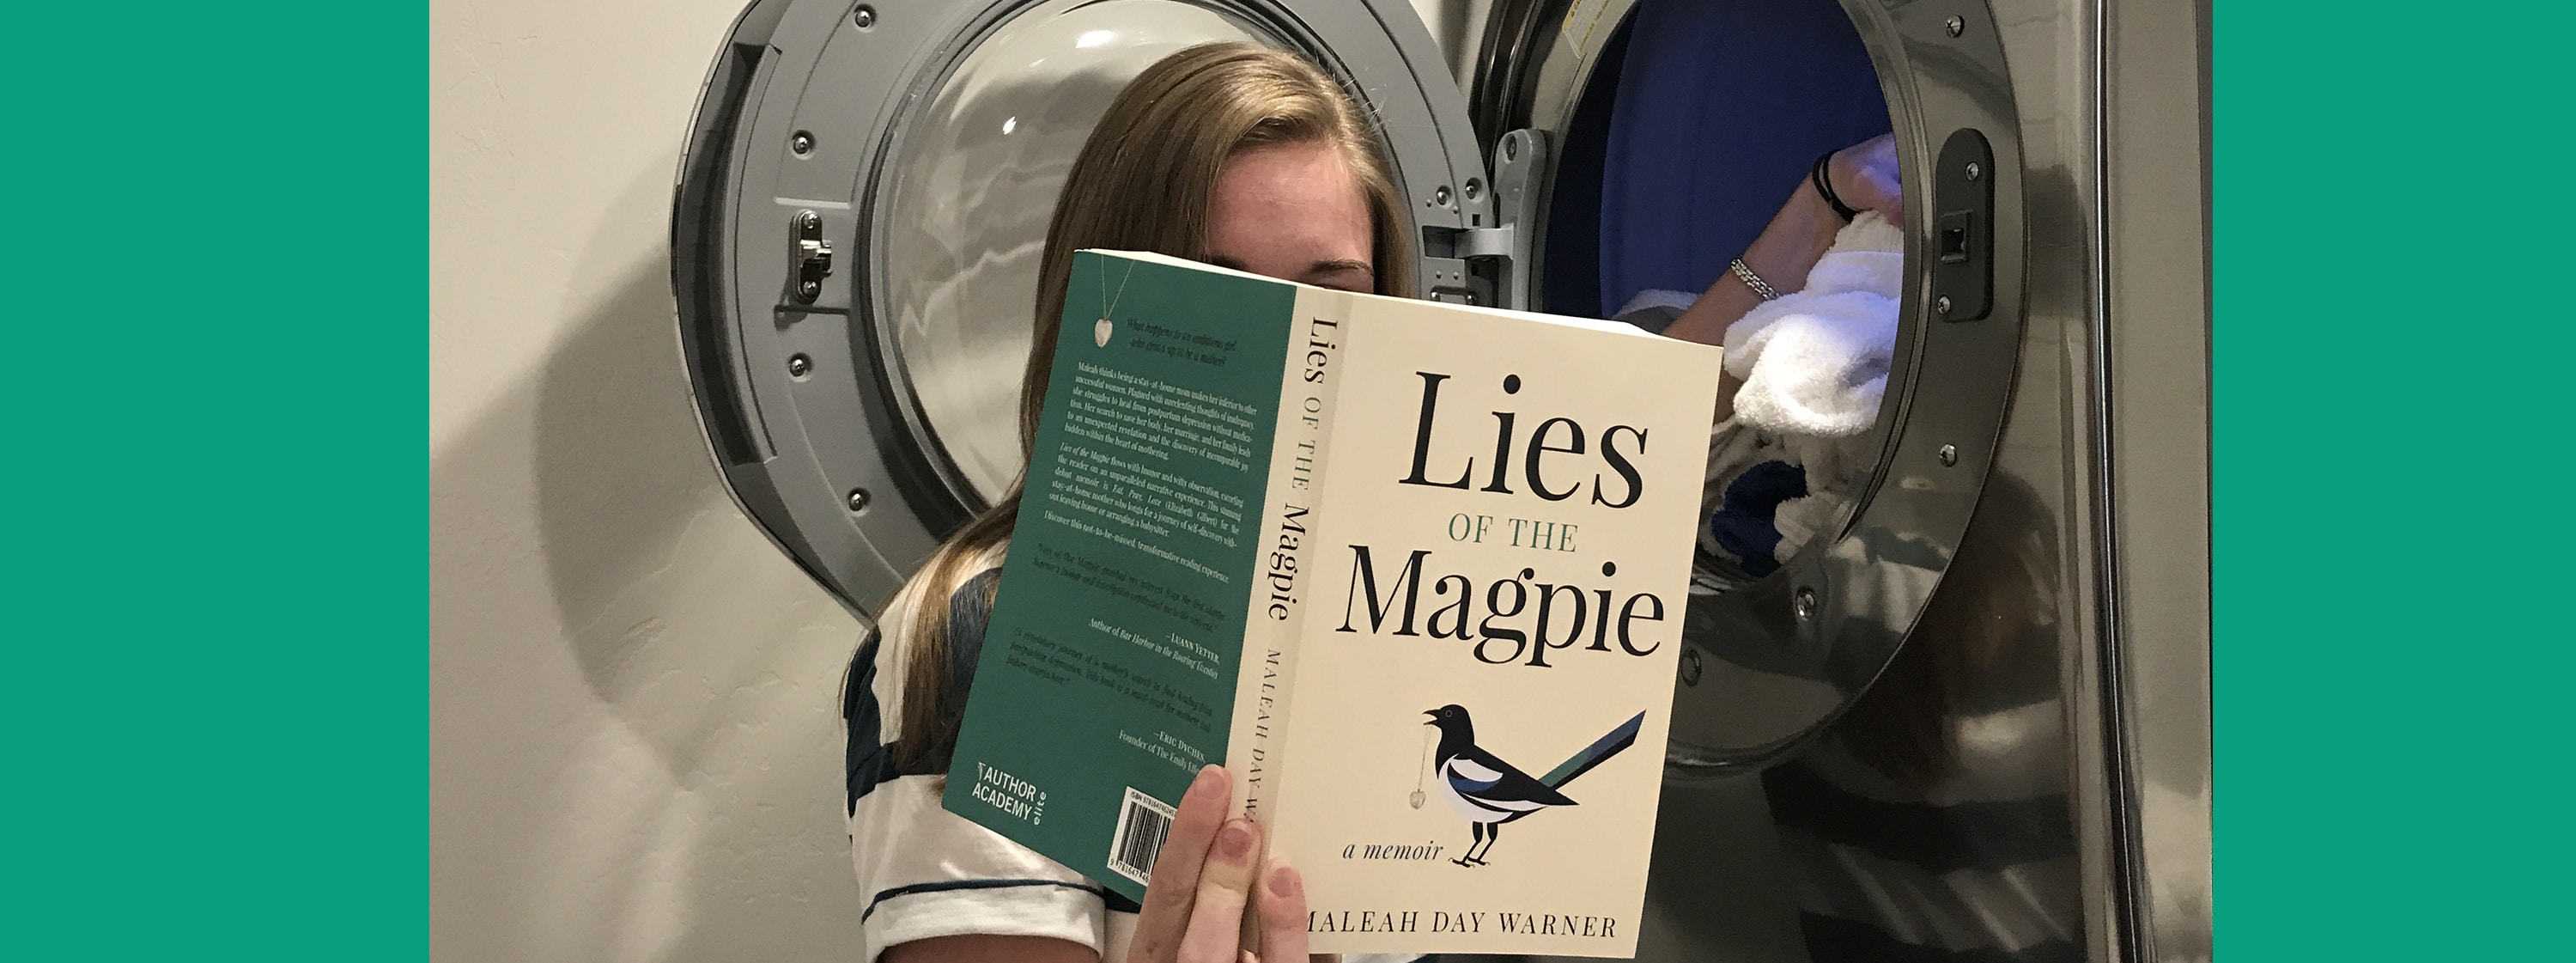 Woman reads Lies of the Magpie while doing laundry